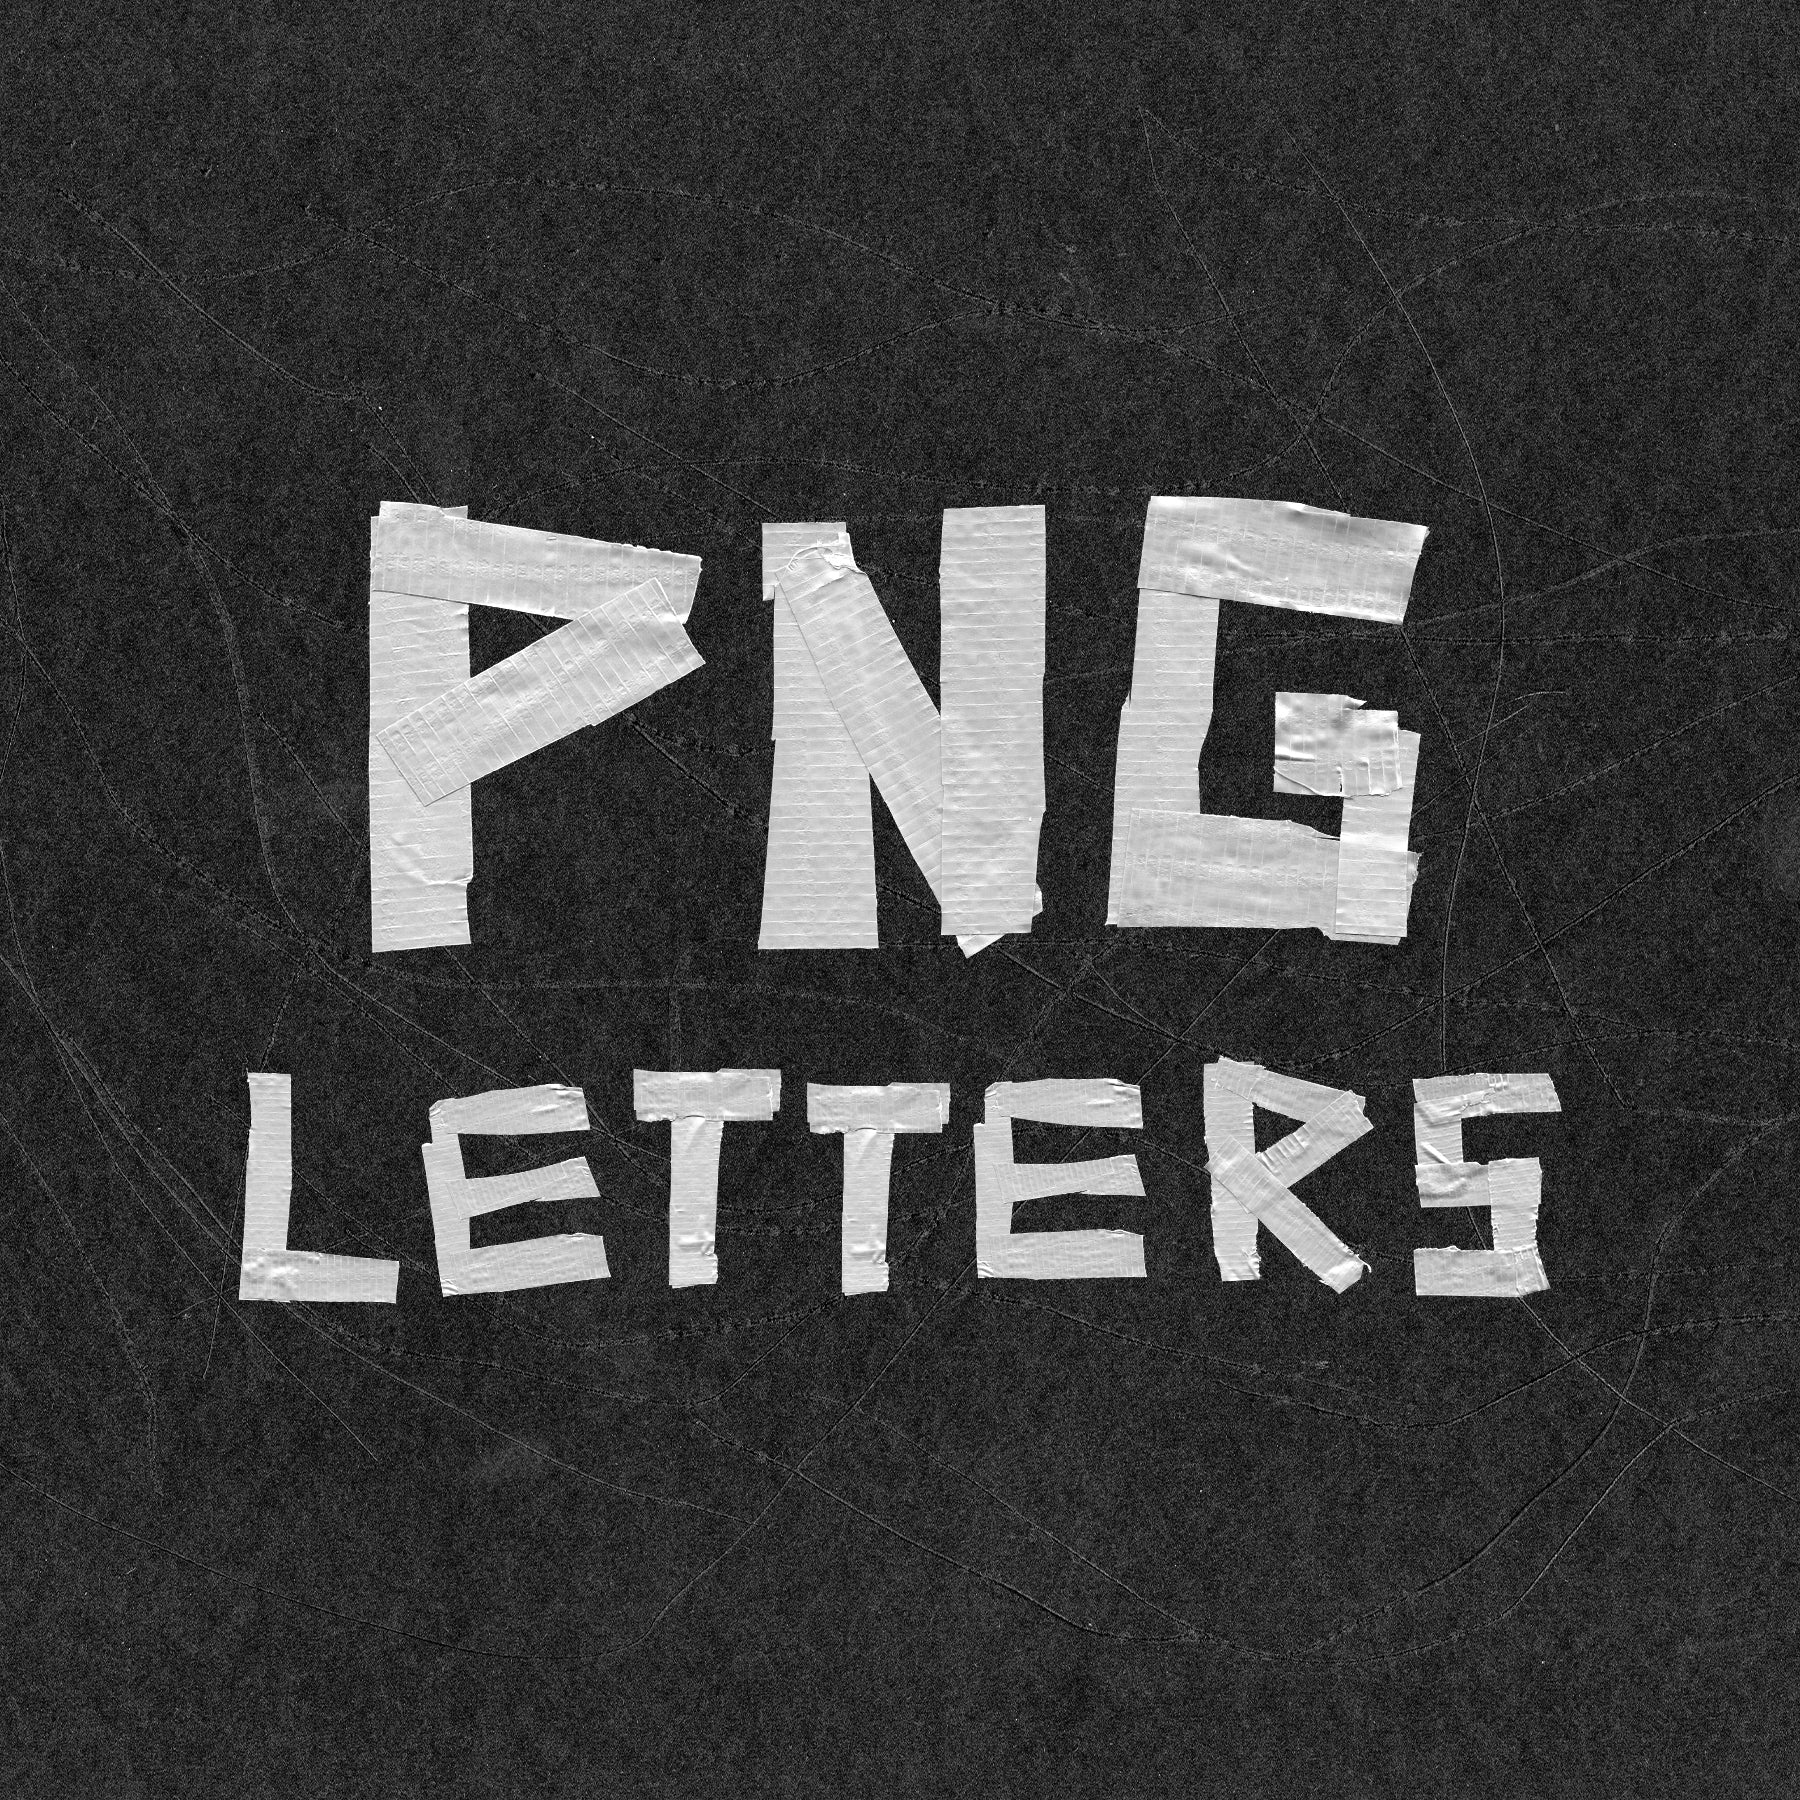 Text made out of duct tape on a textured background that reads "PNG LETTERS".